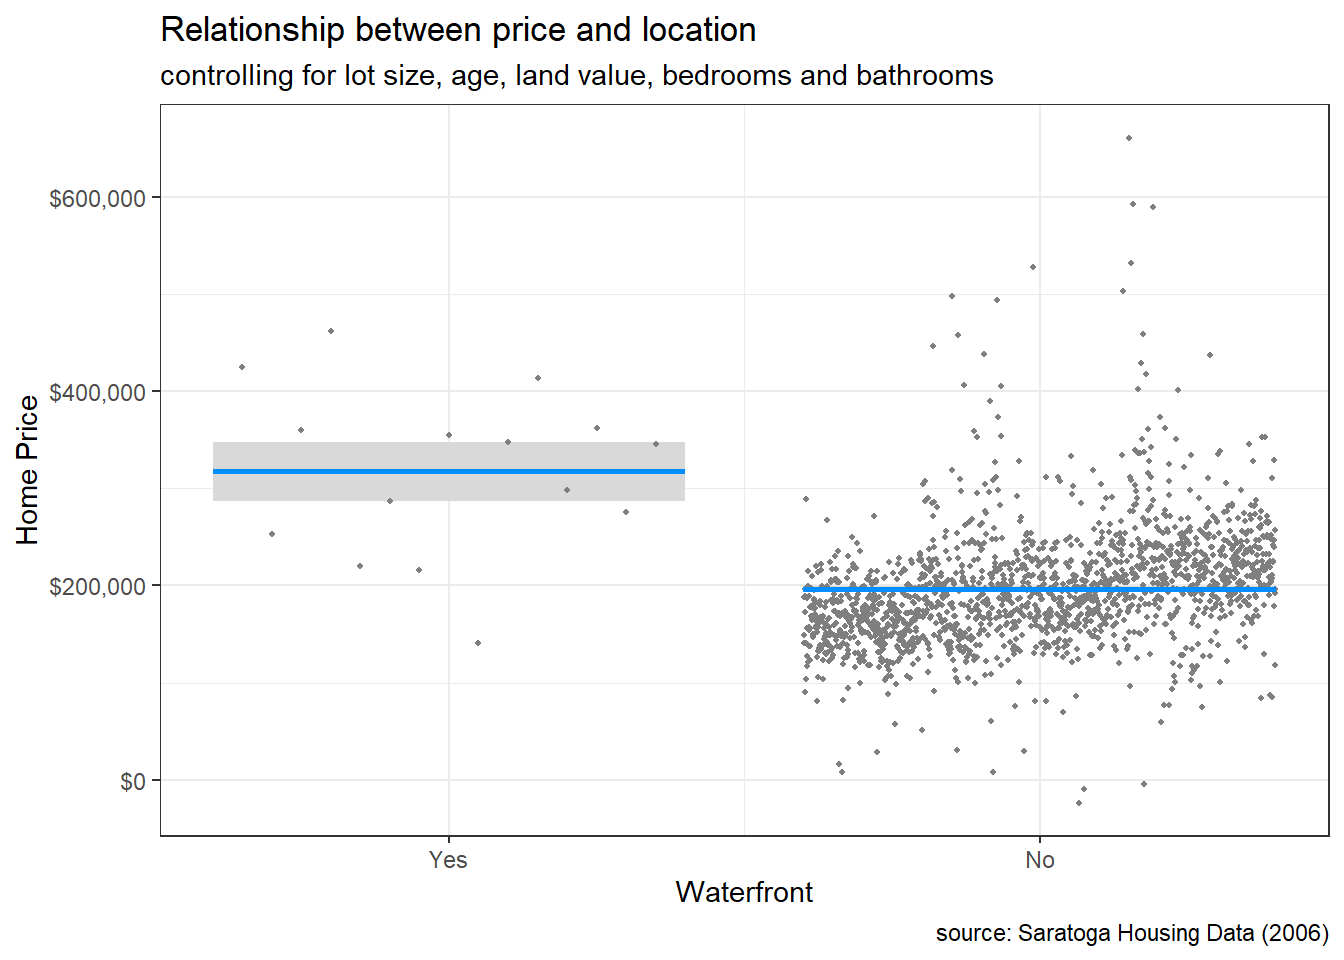 Conditional plot of location and price